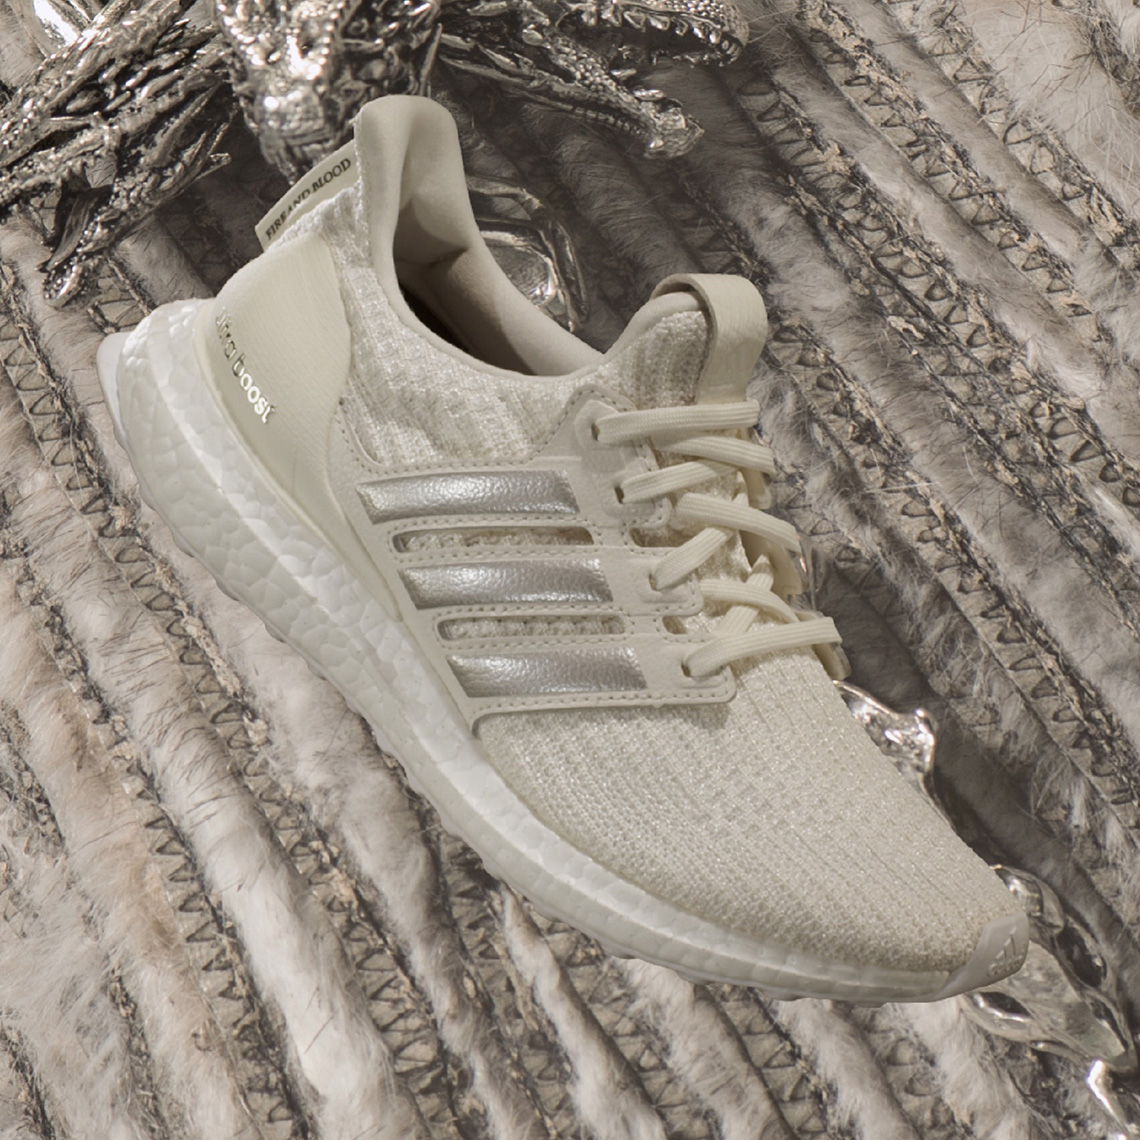 Game Of Thrones Adidas Shoes Release Date 3